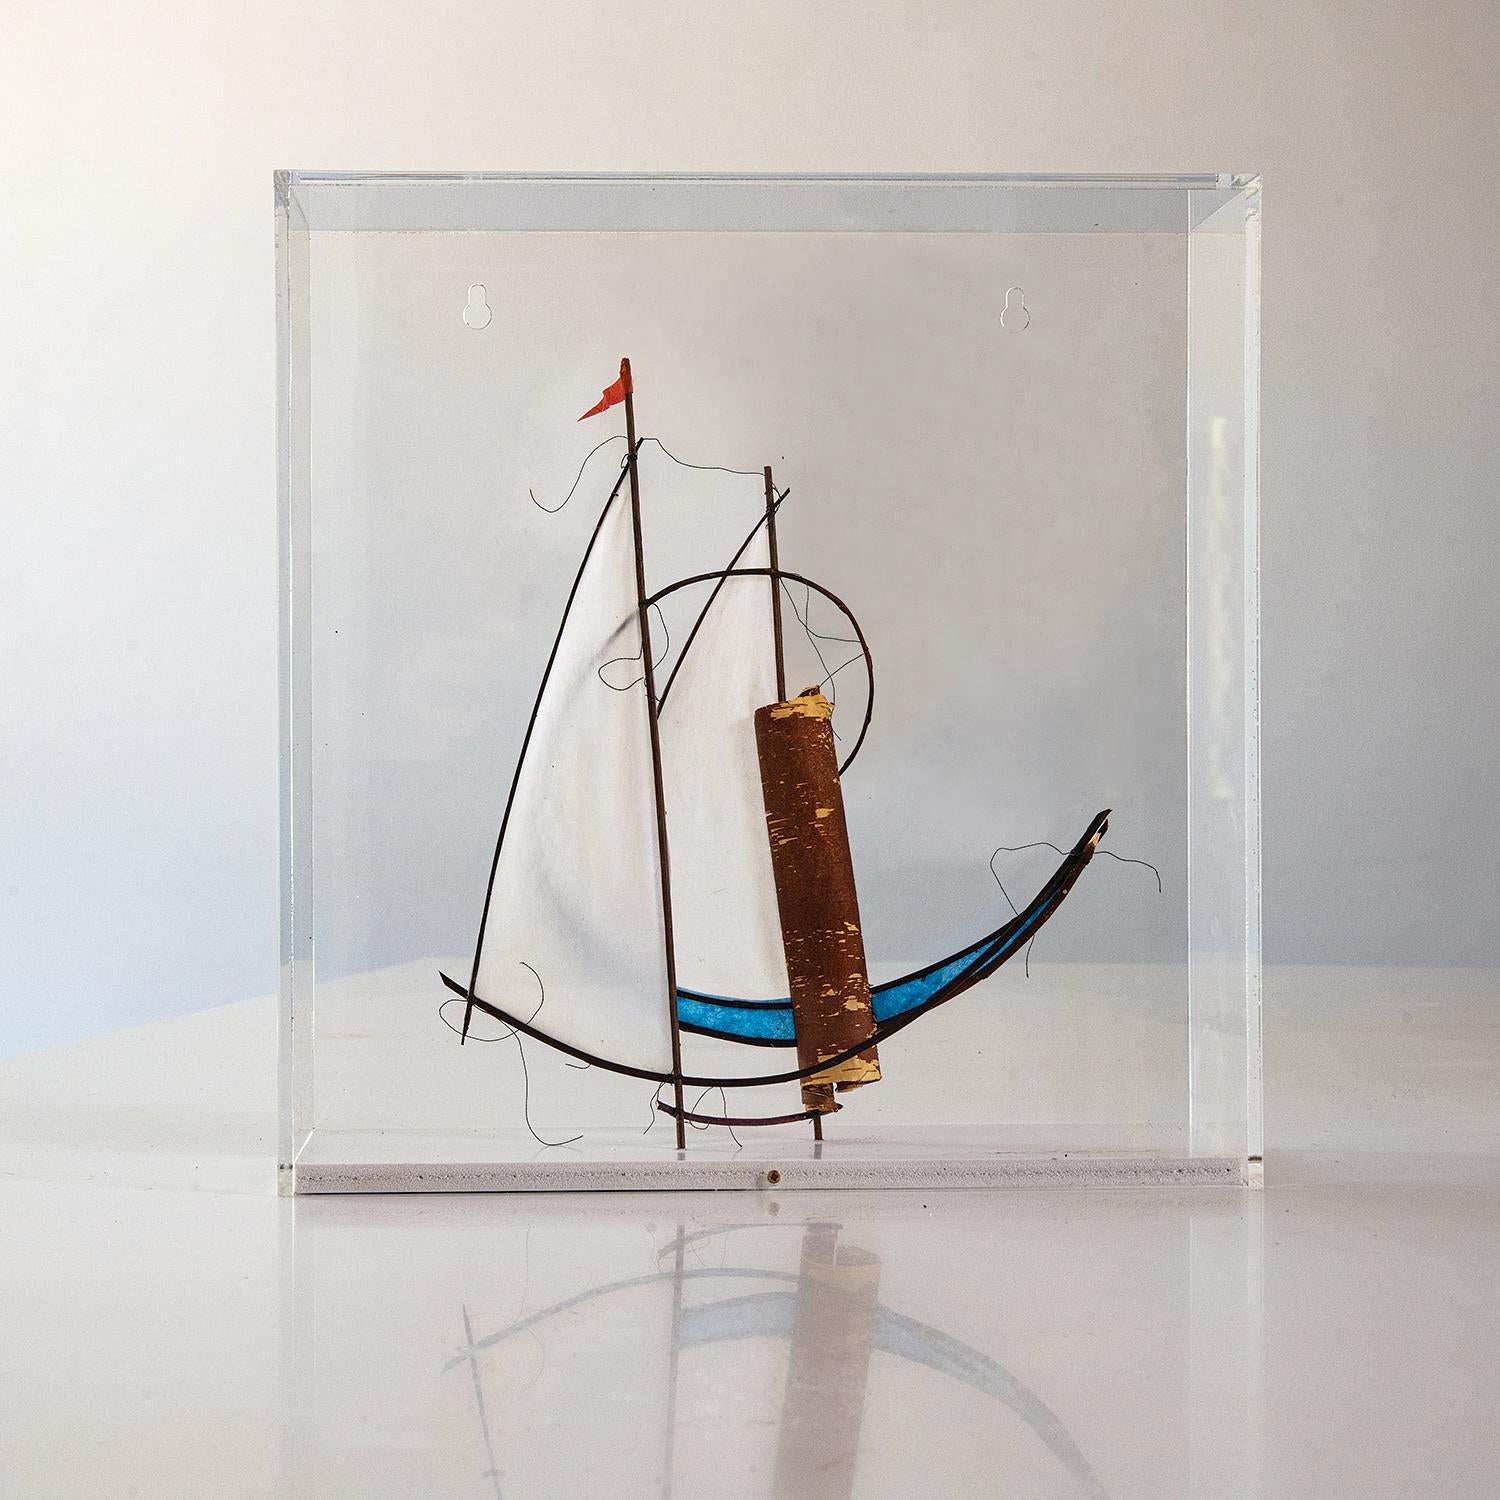 Paper Sculpture IV, Abstract boat sculpture by Jane Balsgaard